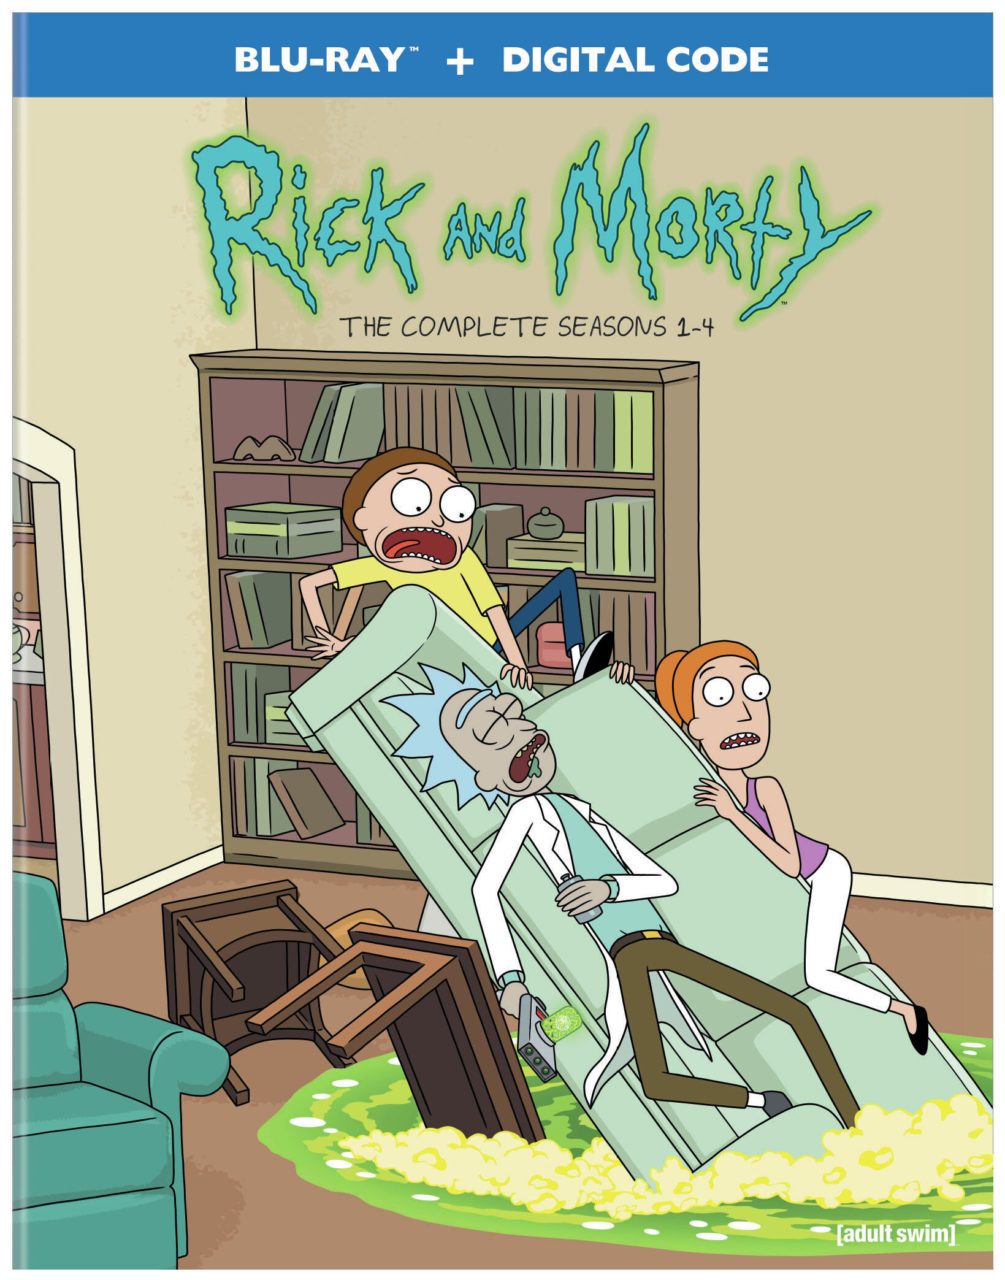 Rick And Morty: The Complete Seasons 1-4 Blu-Ray Combo Pack cover (Warner Bros. Home Entertainment)